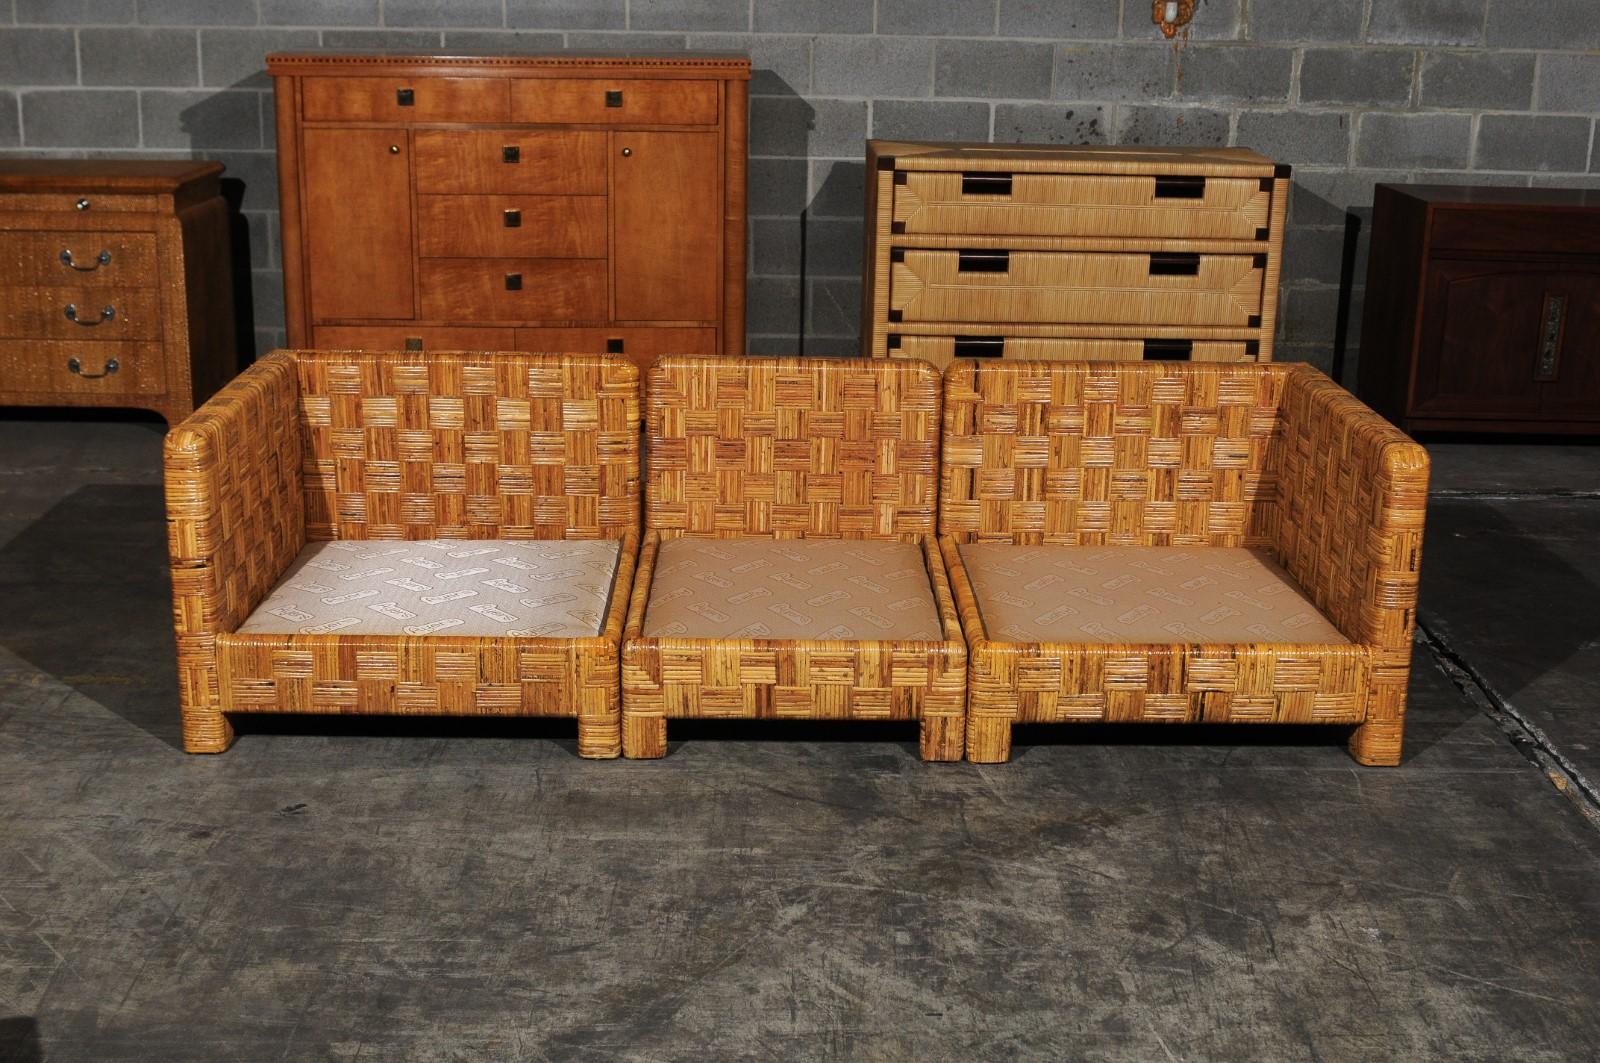 A stunning restored Billy Baldwin style Parsons three-seat sofa, circa 1975. Elegant hardwood form, painstakingly veneered in basketweave cane. Exceptional quality and craftsmanship. The set may also be arranged to use as a two-seat loveseat and a